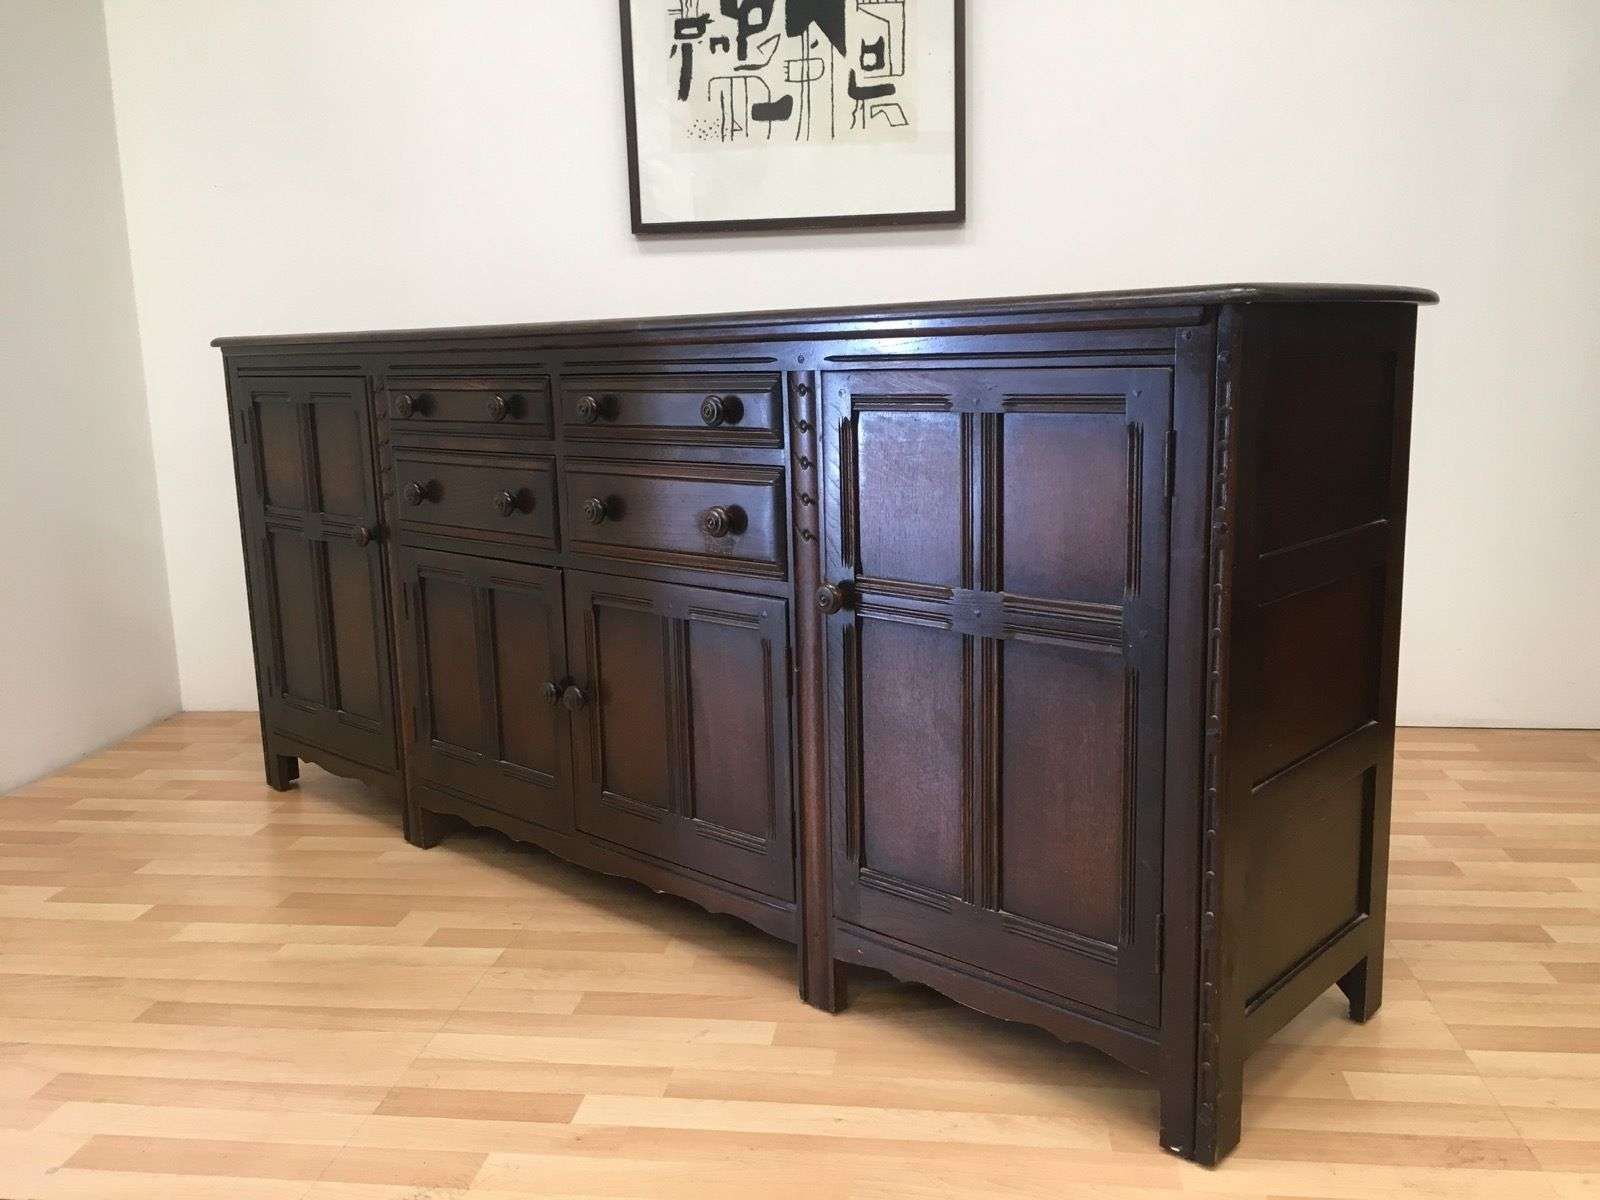 Rare Large Vintage Ercol 7 Foot Mid Century Sideboard In Dark Throughout 7 Foot Sideboards (View 3 of 20)